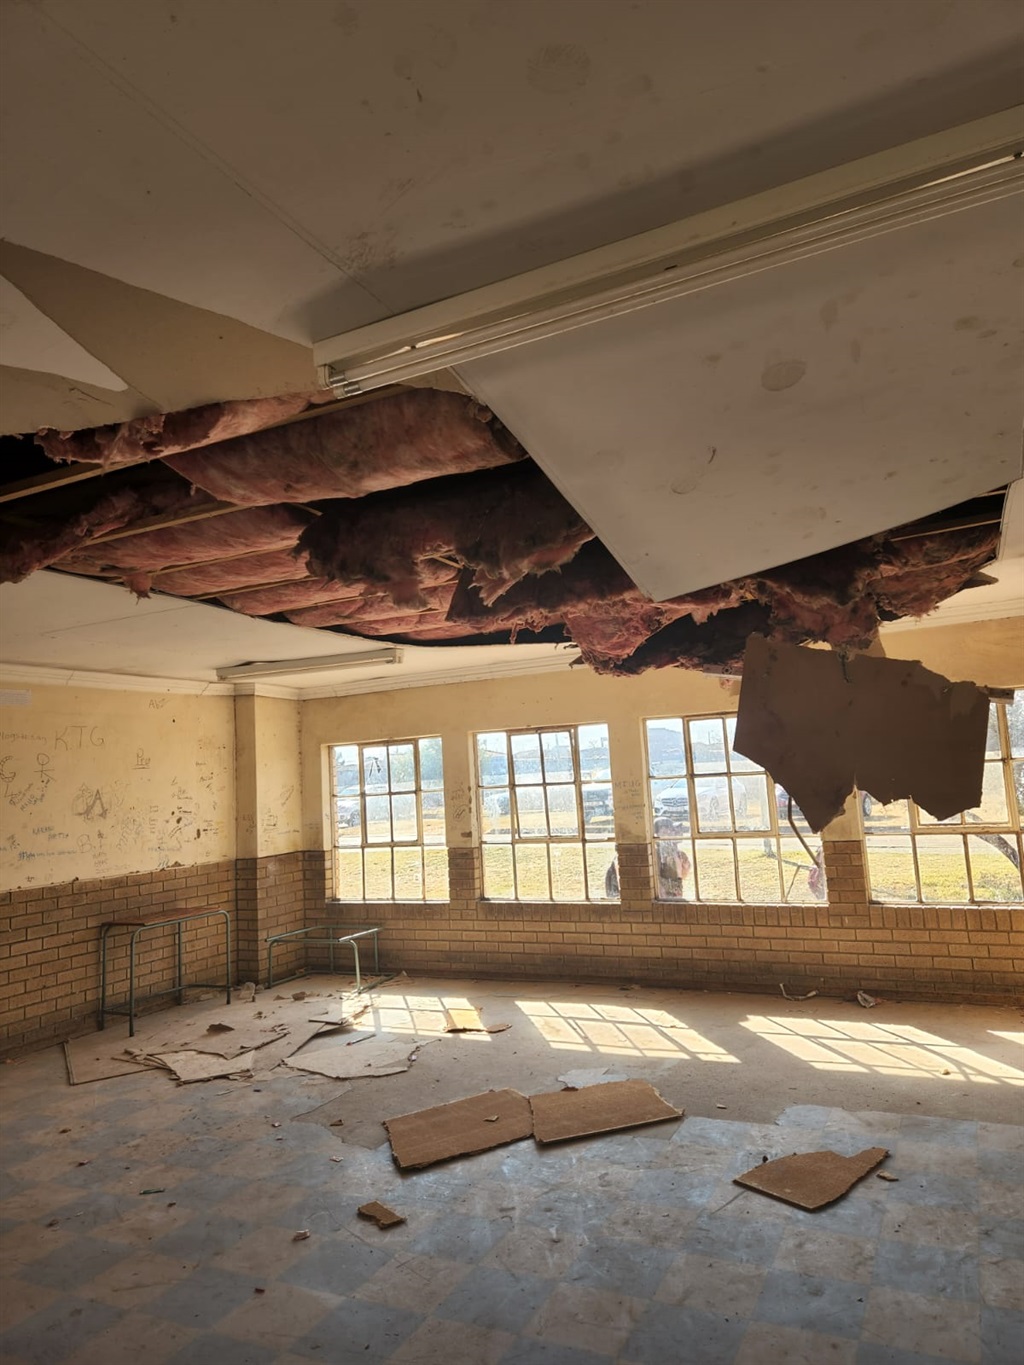 This classroom was abandoned after ceiling allegedly fell on top of pupils. Photo by Phineas Khoza